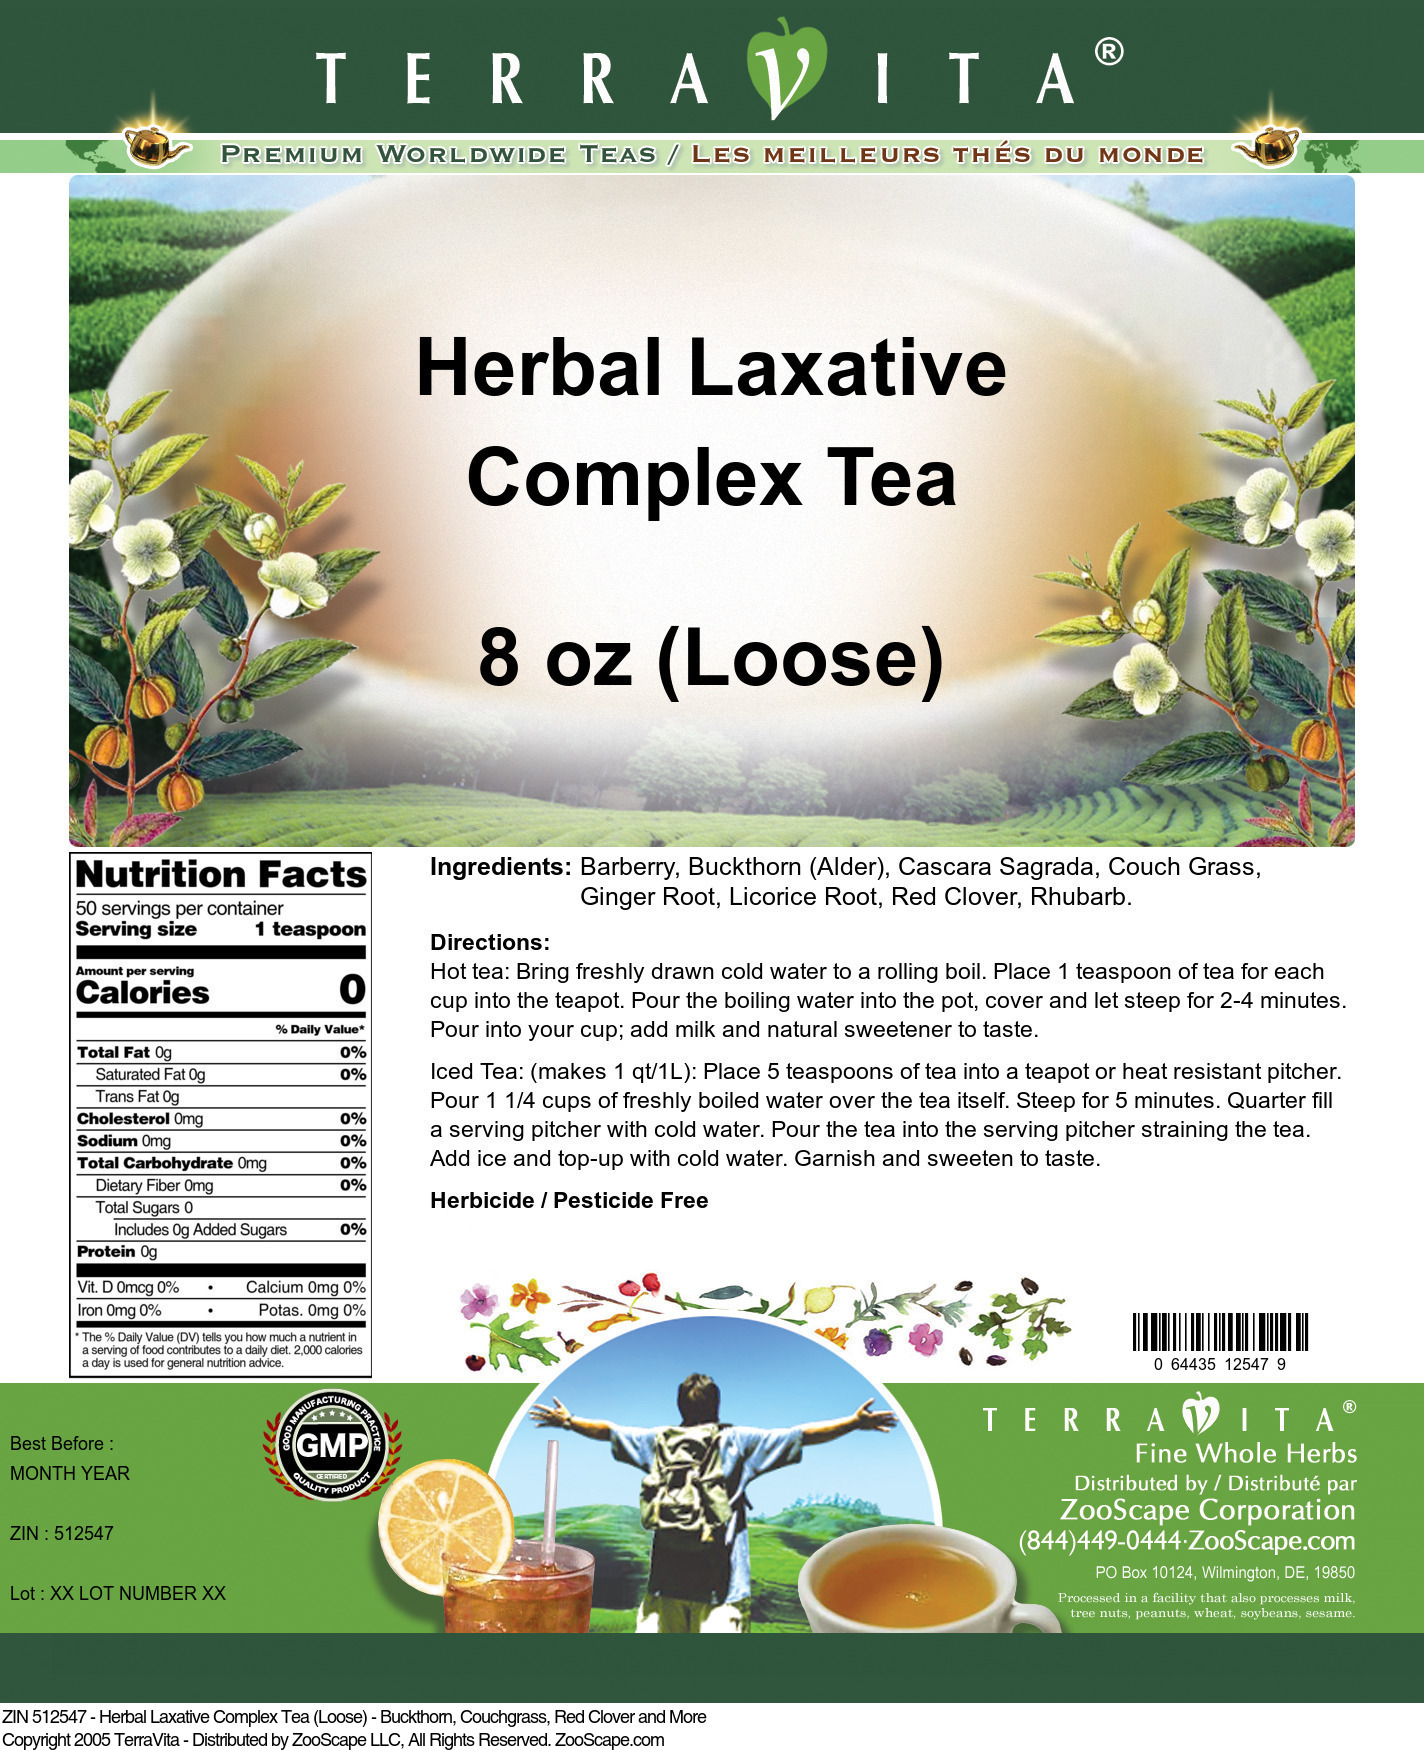 Herbal Laxative Complex Tea (Loose) - Buckthorn, Couchgrass, Red Clover and More - Label